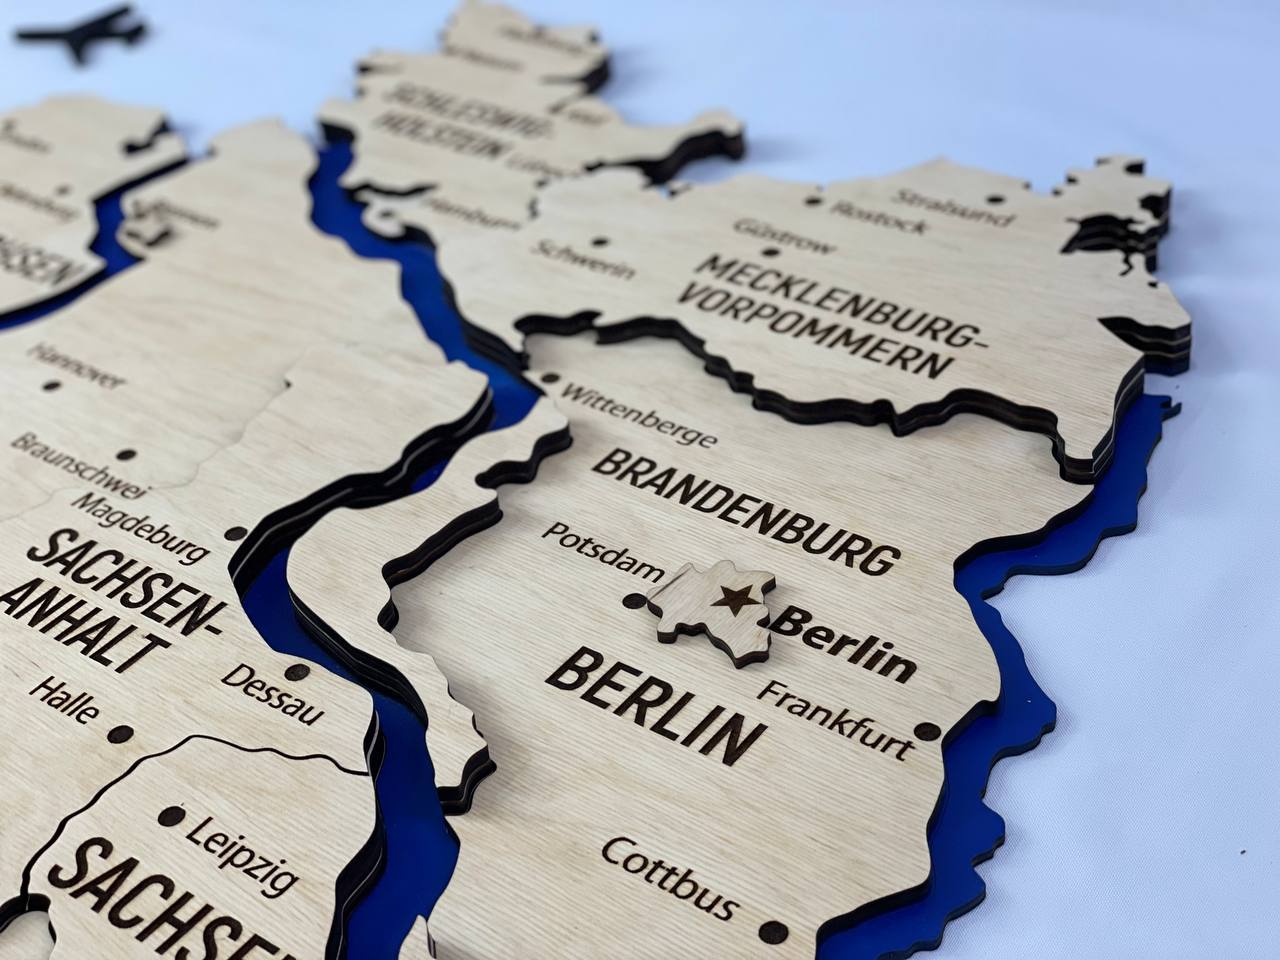 Map of Germany with Rivers Natural Color